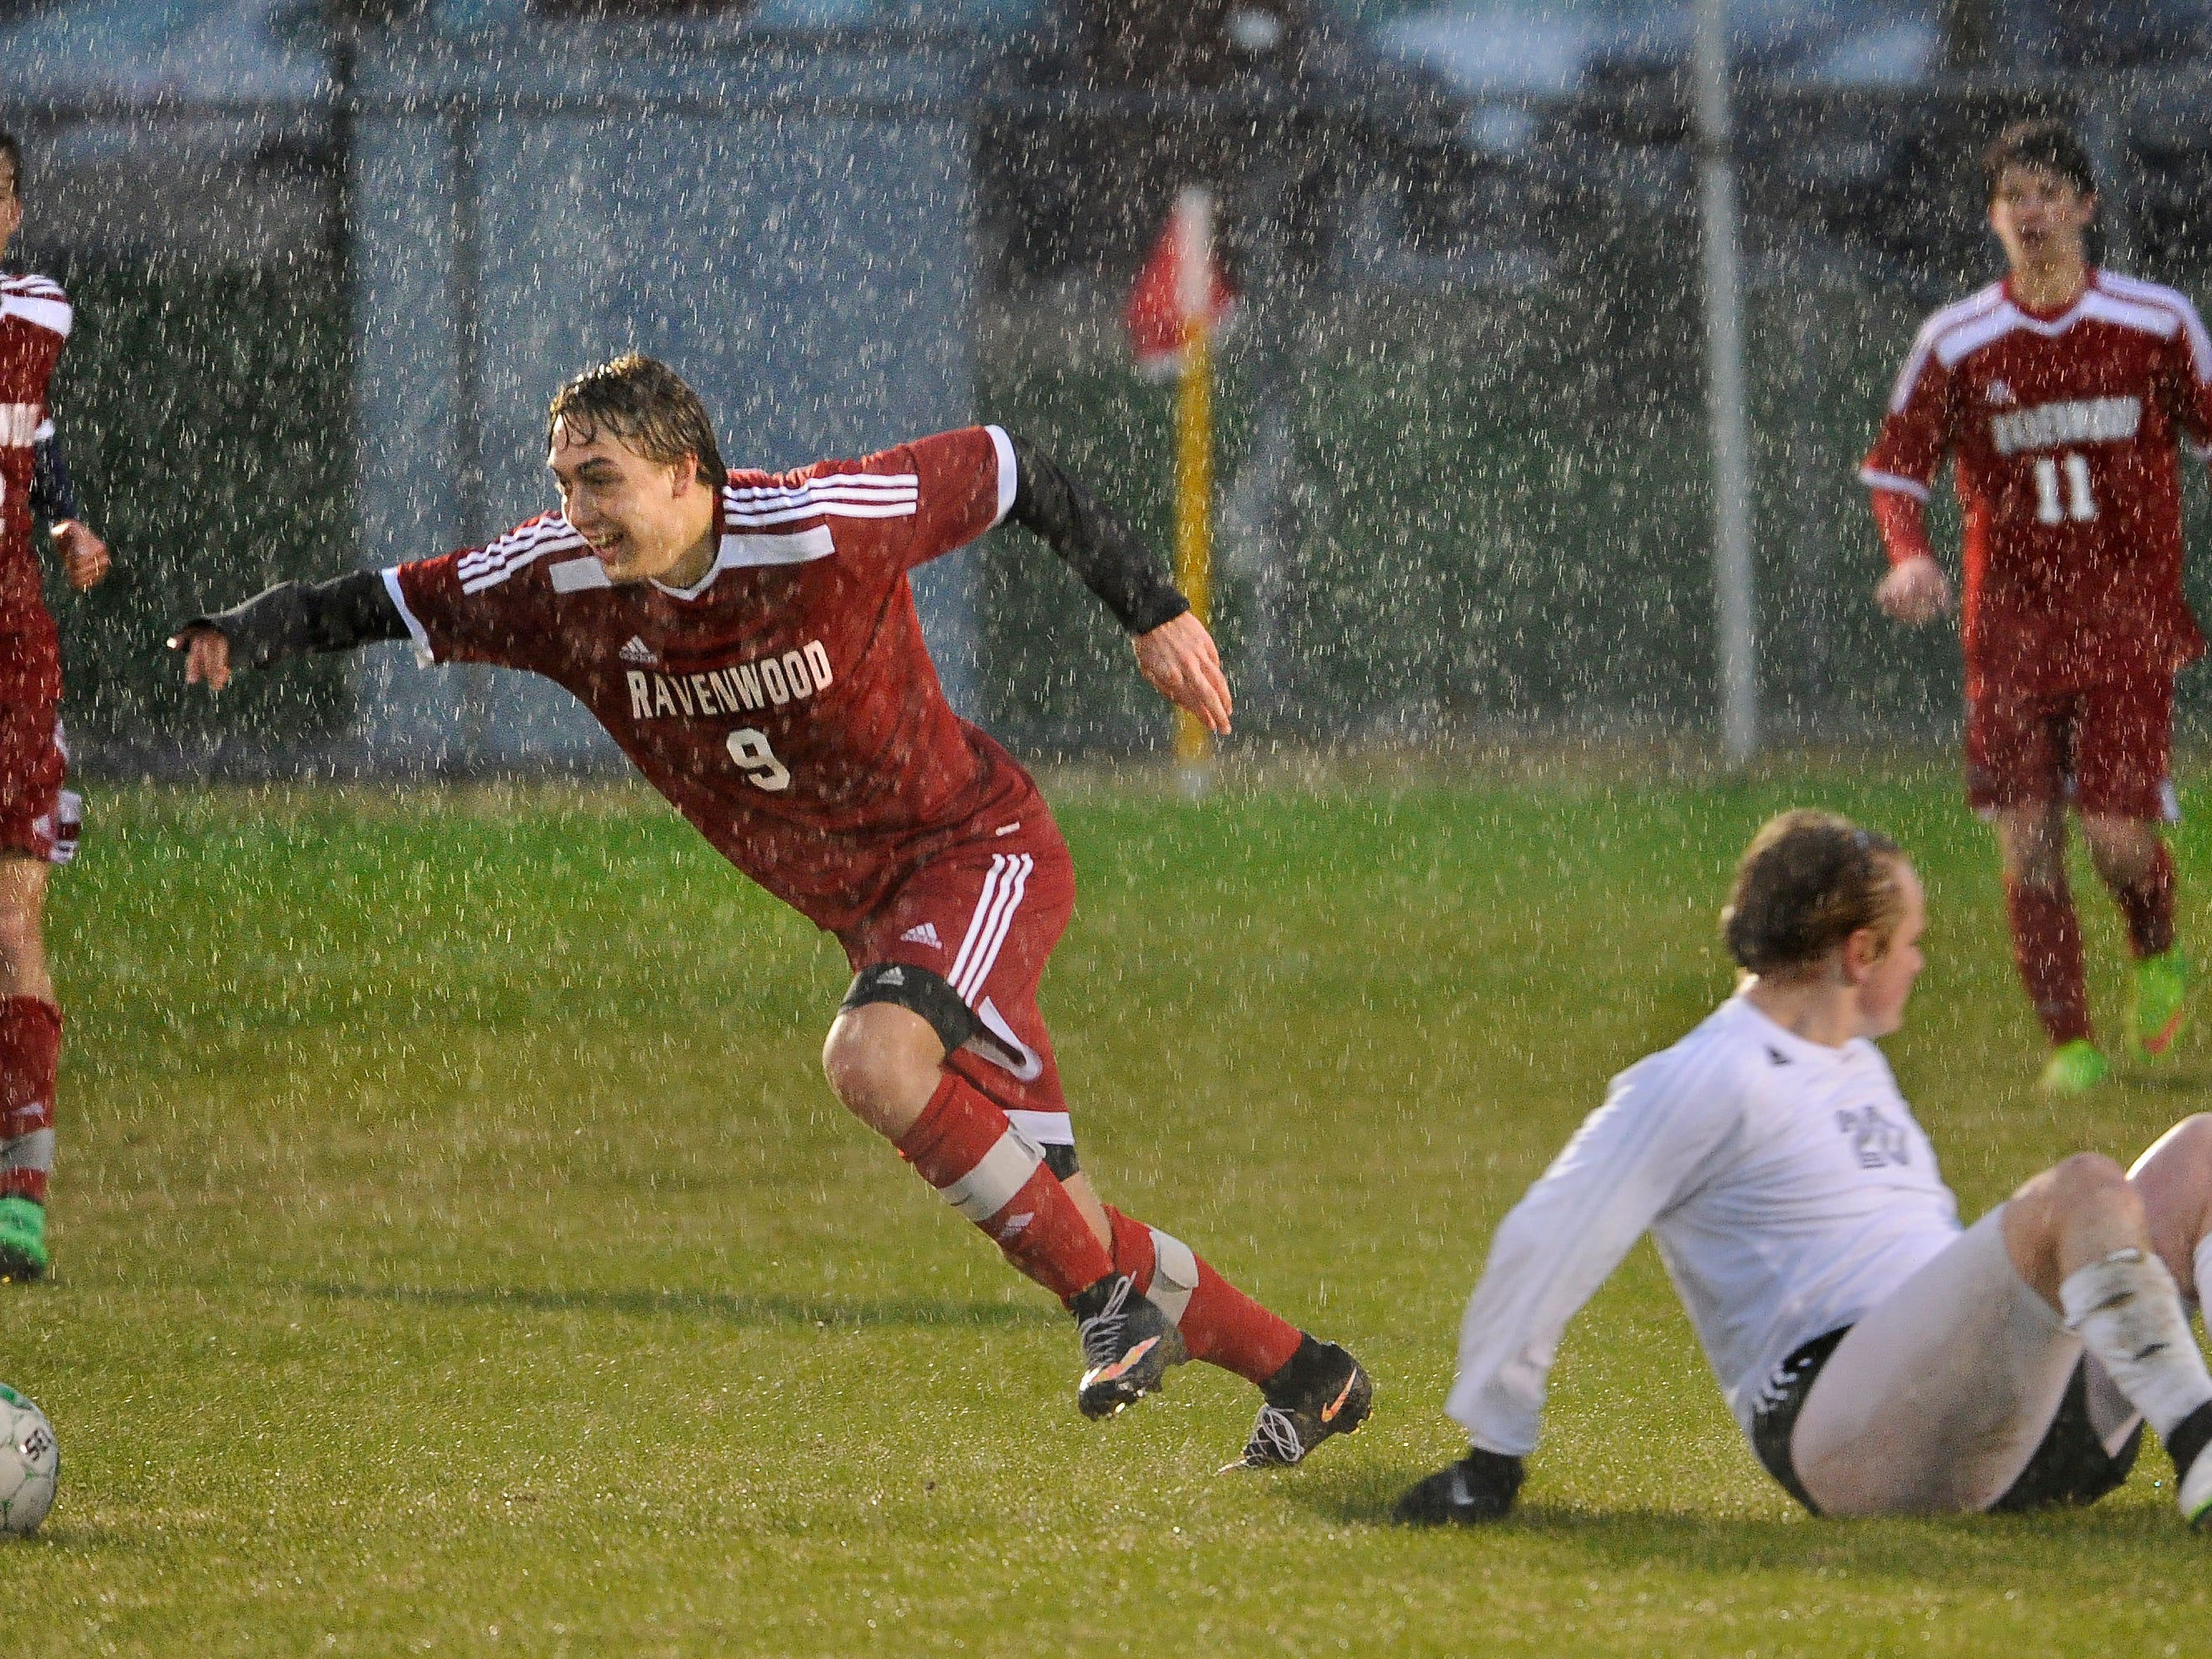 Ravenwood’s Sam Knickerbocker goes after the ball after knocking down Independence’s Daniel Robinson during a rain-soaked soccer match recently.